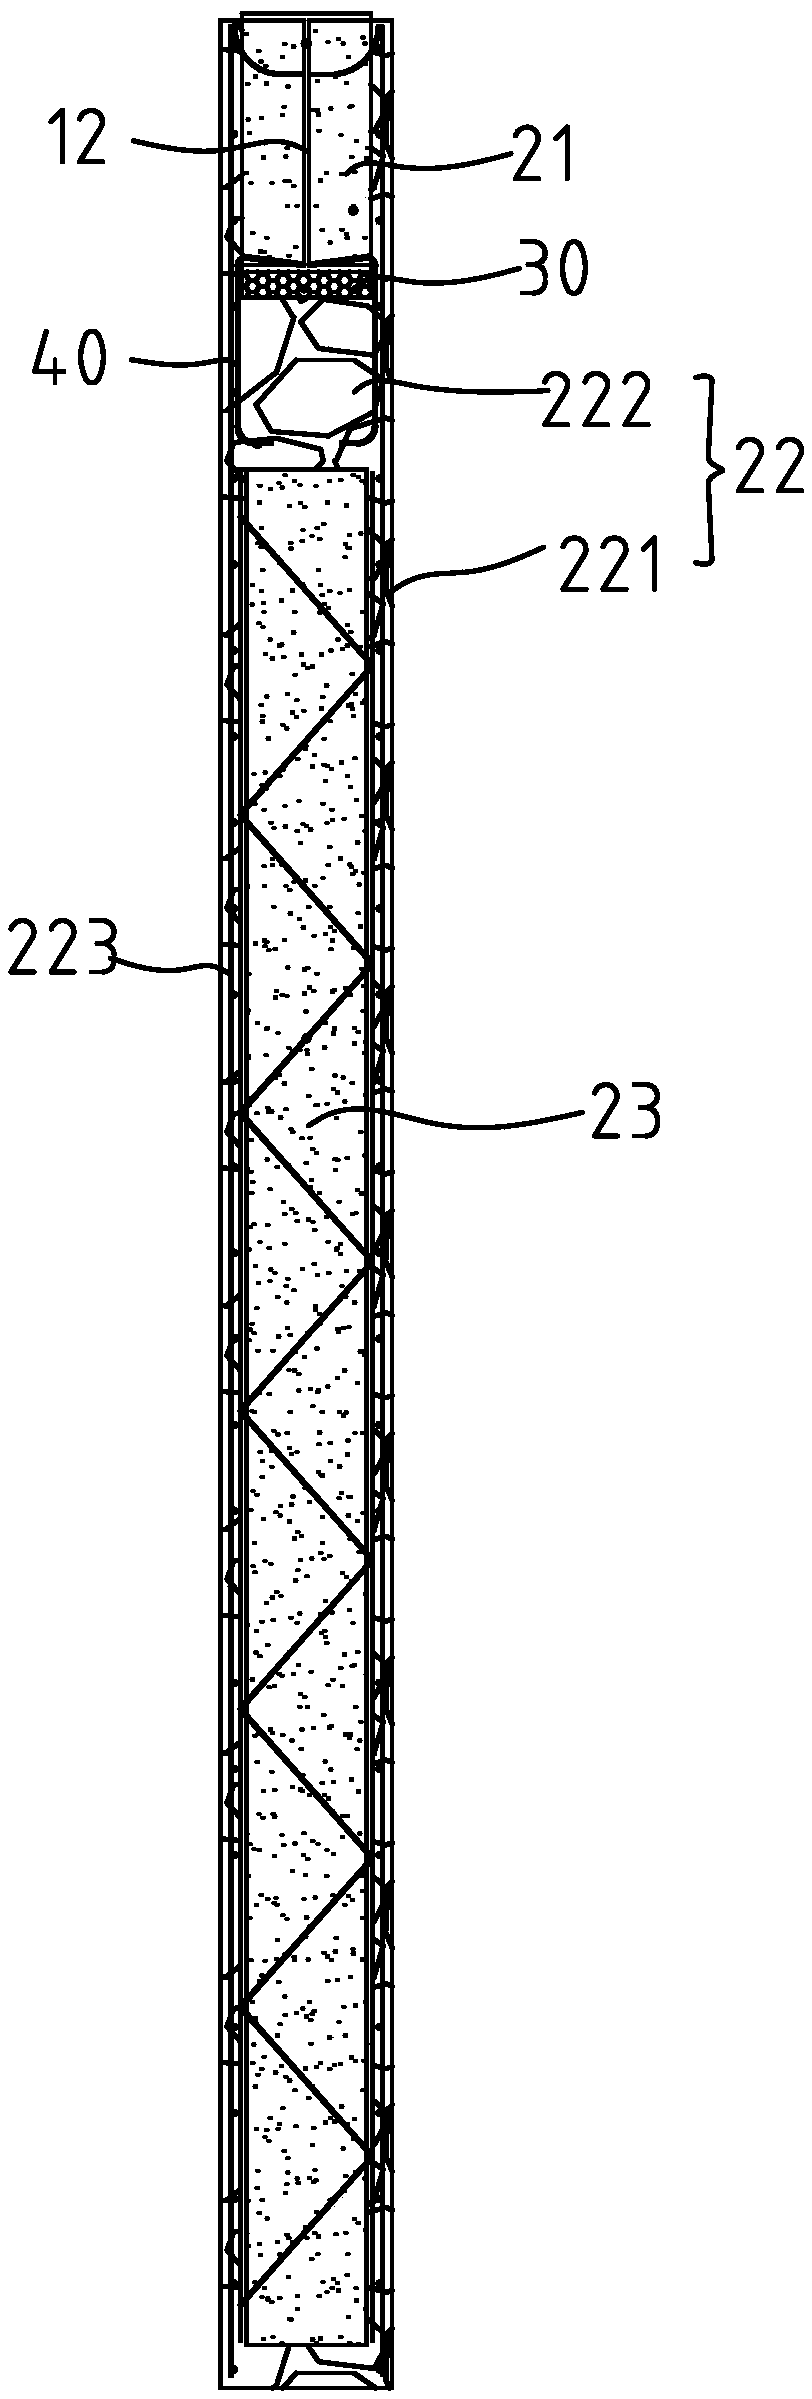 Connection structure of steel structure and precast concrete slab